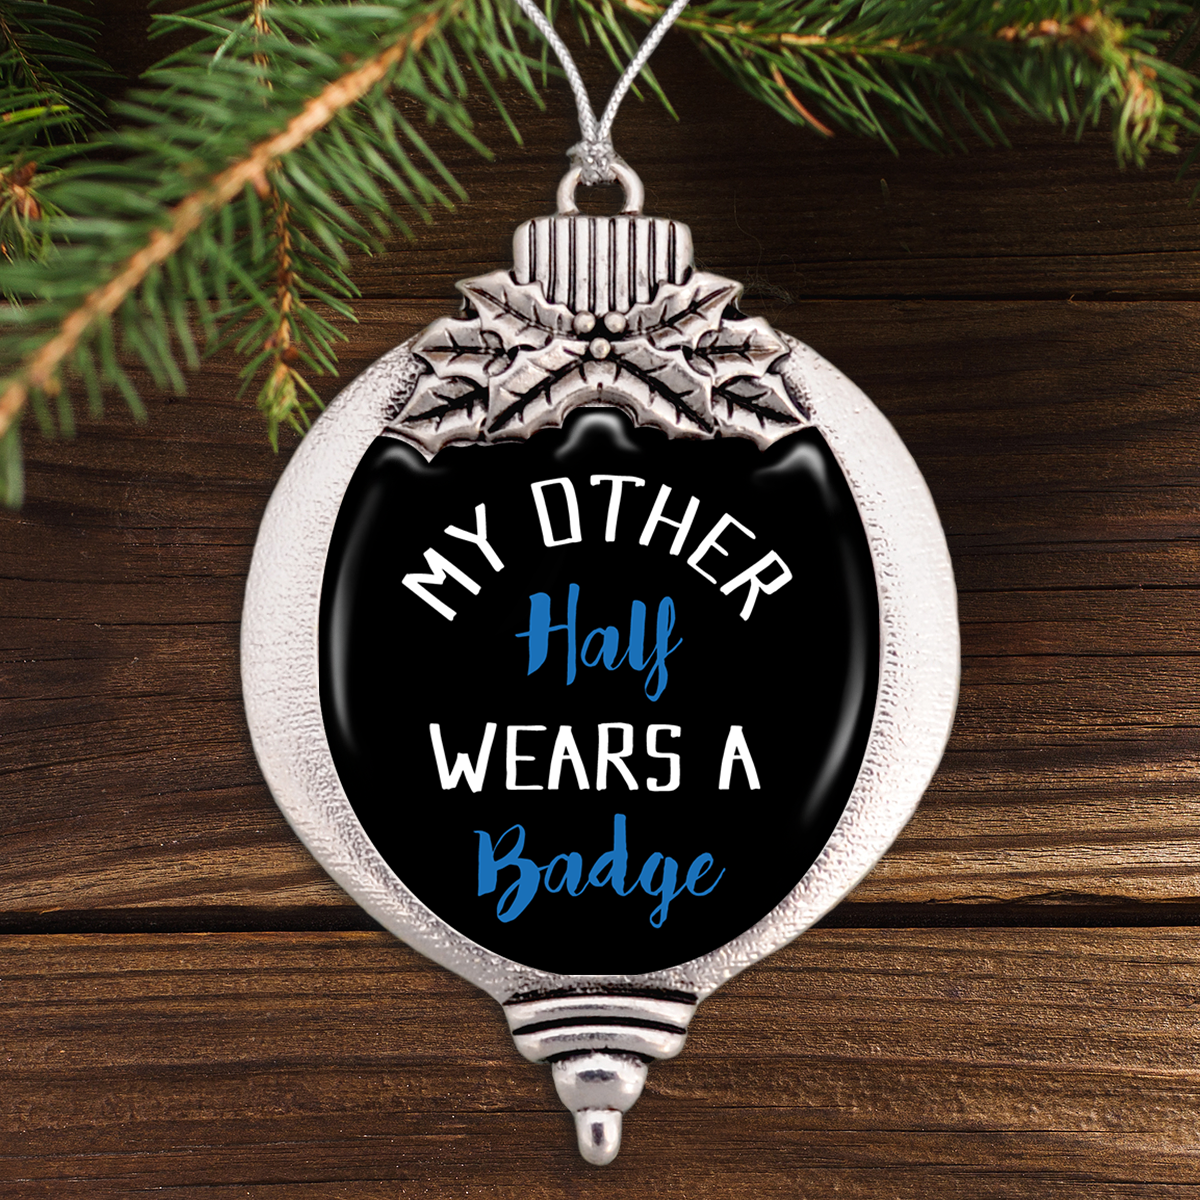 My Other Half Wears A Badge Bulb Ornament